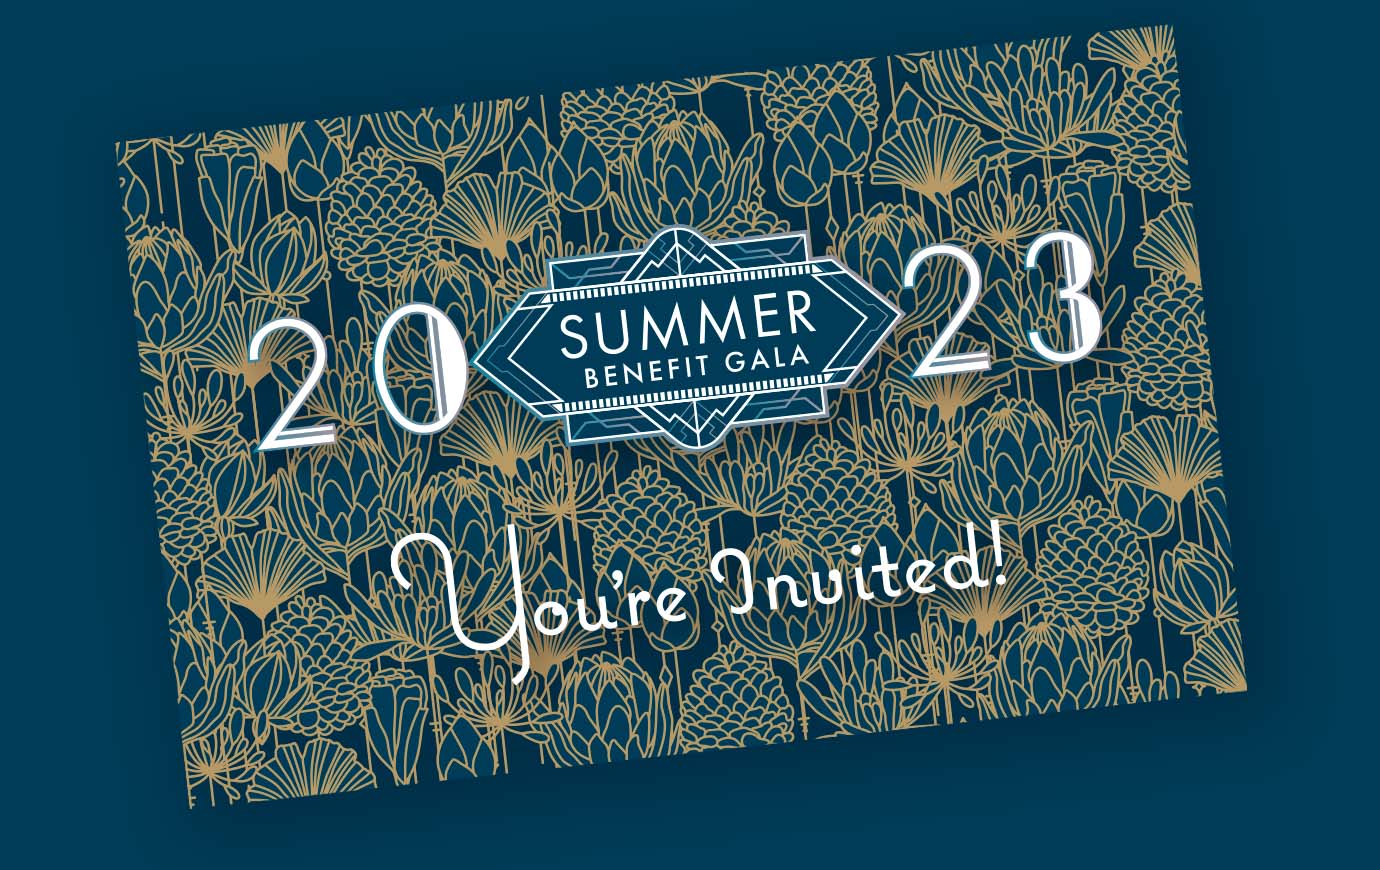 You're Invited to The Floating Hospital's 2023 Summer Benefit Gala